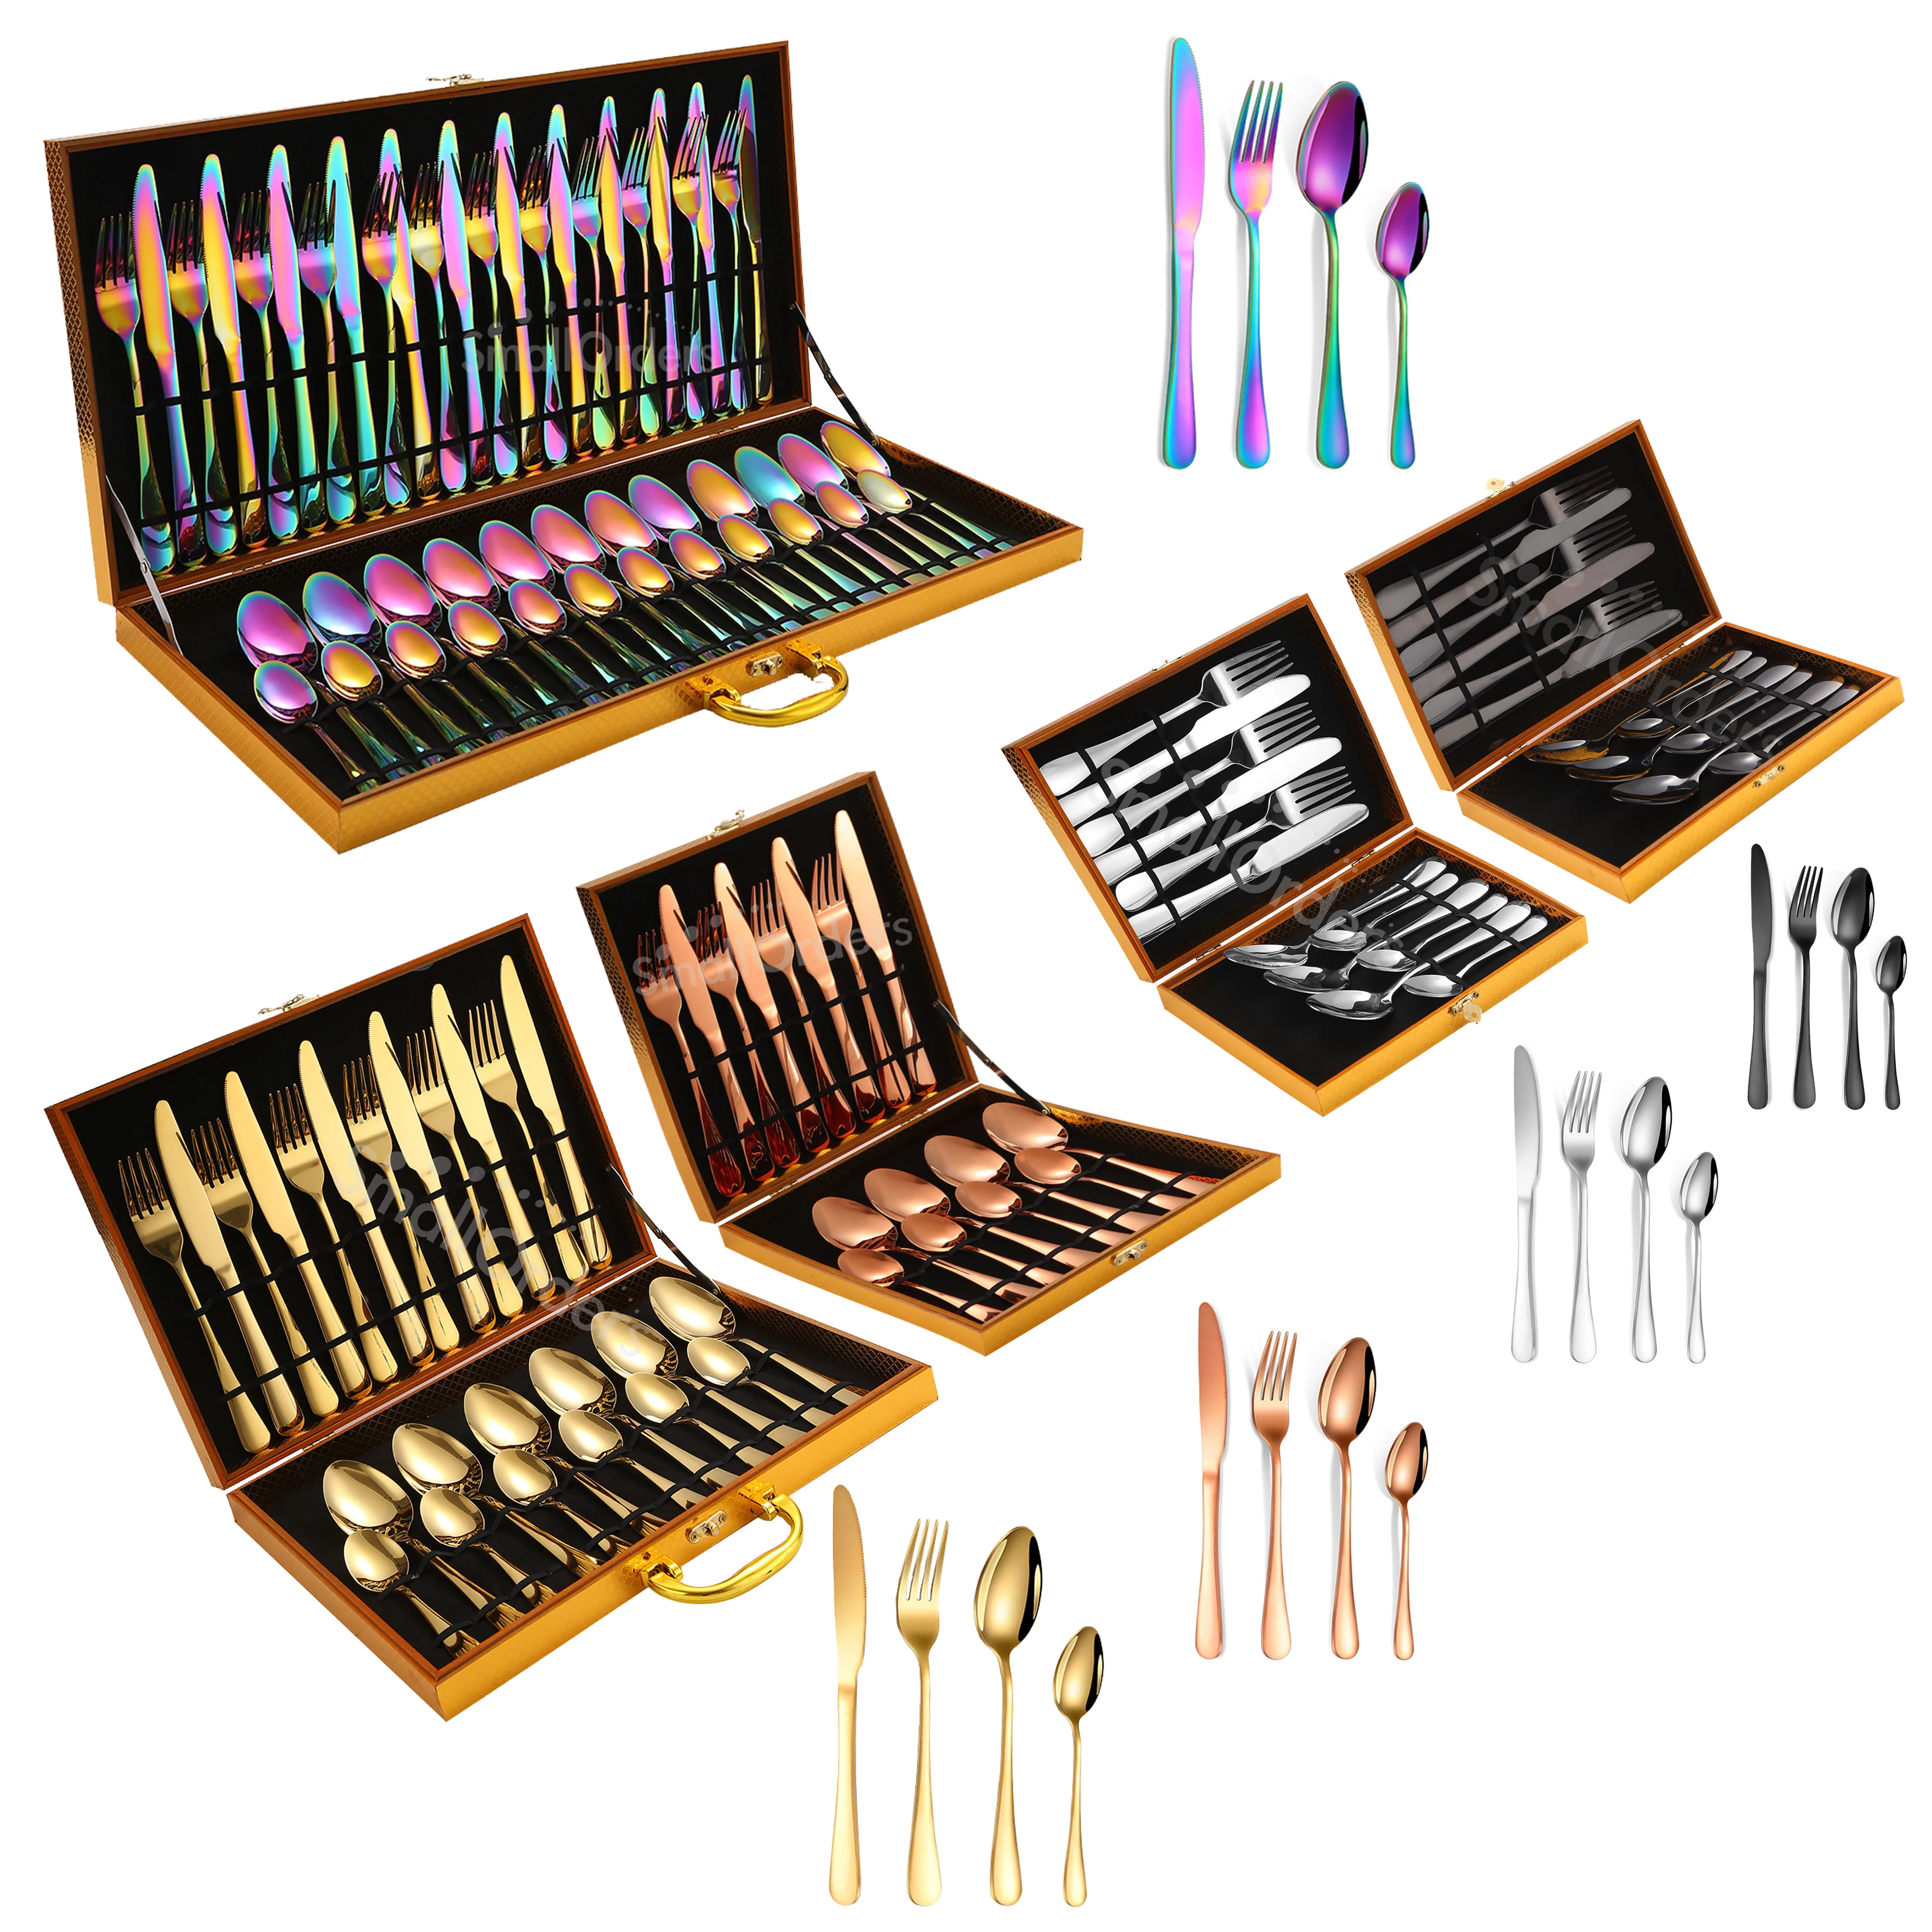 Luxury stainless steel flatware promotional corporate business gifts gift set sets item 2024 new product ideas novelties 2024